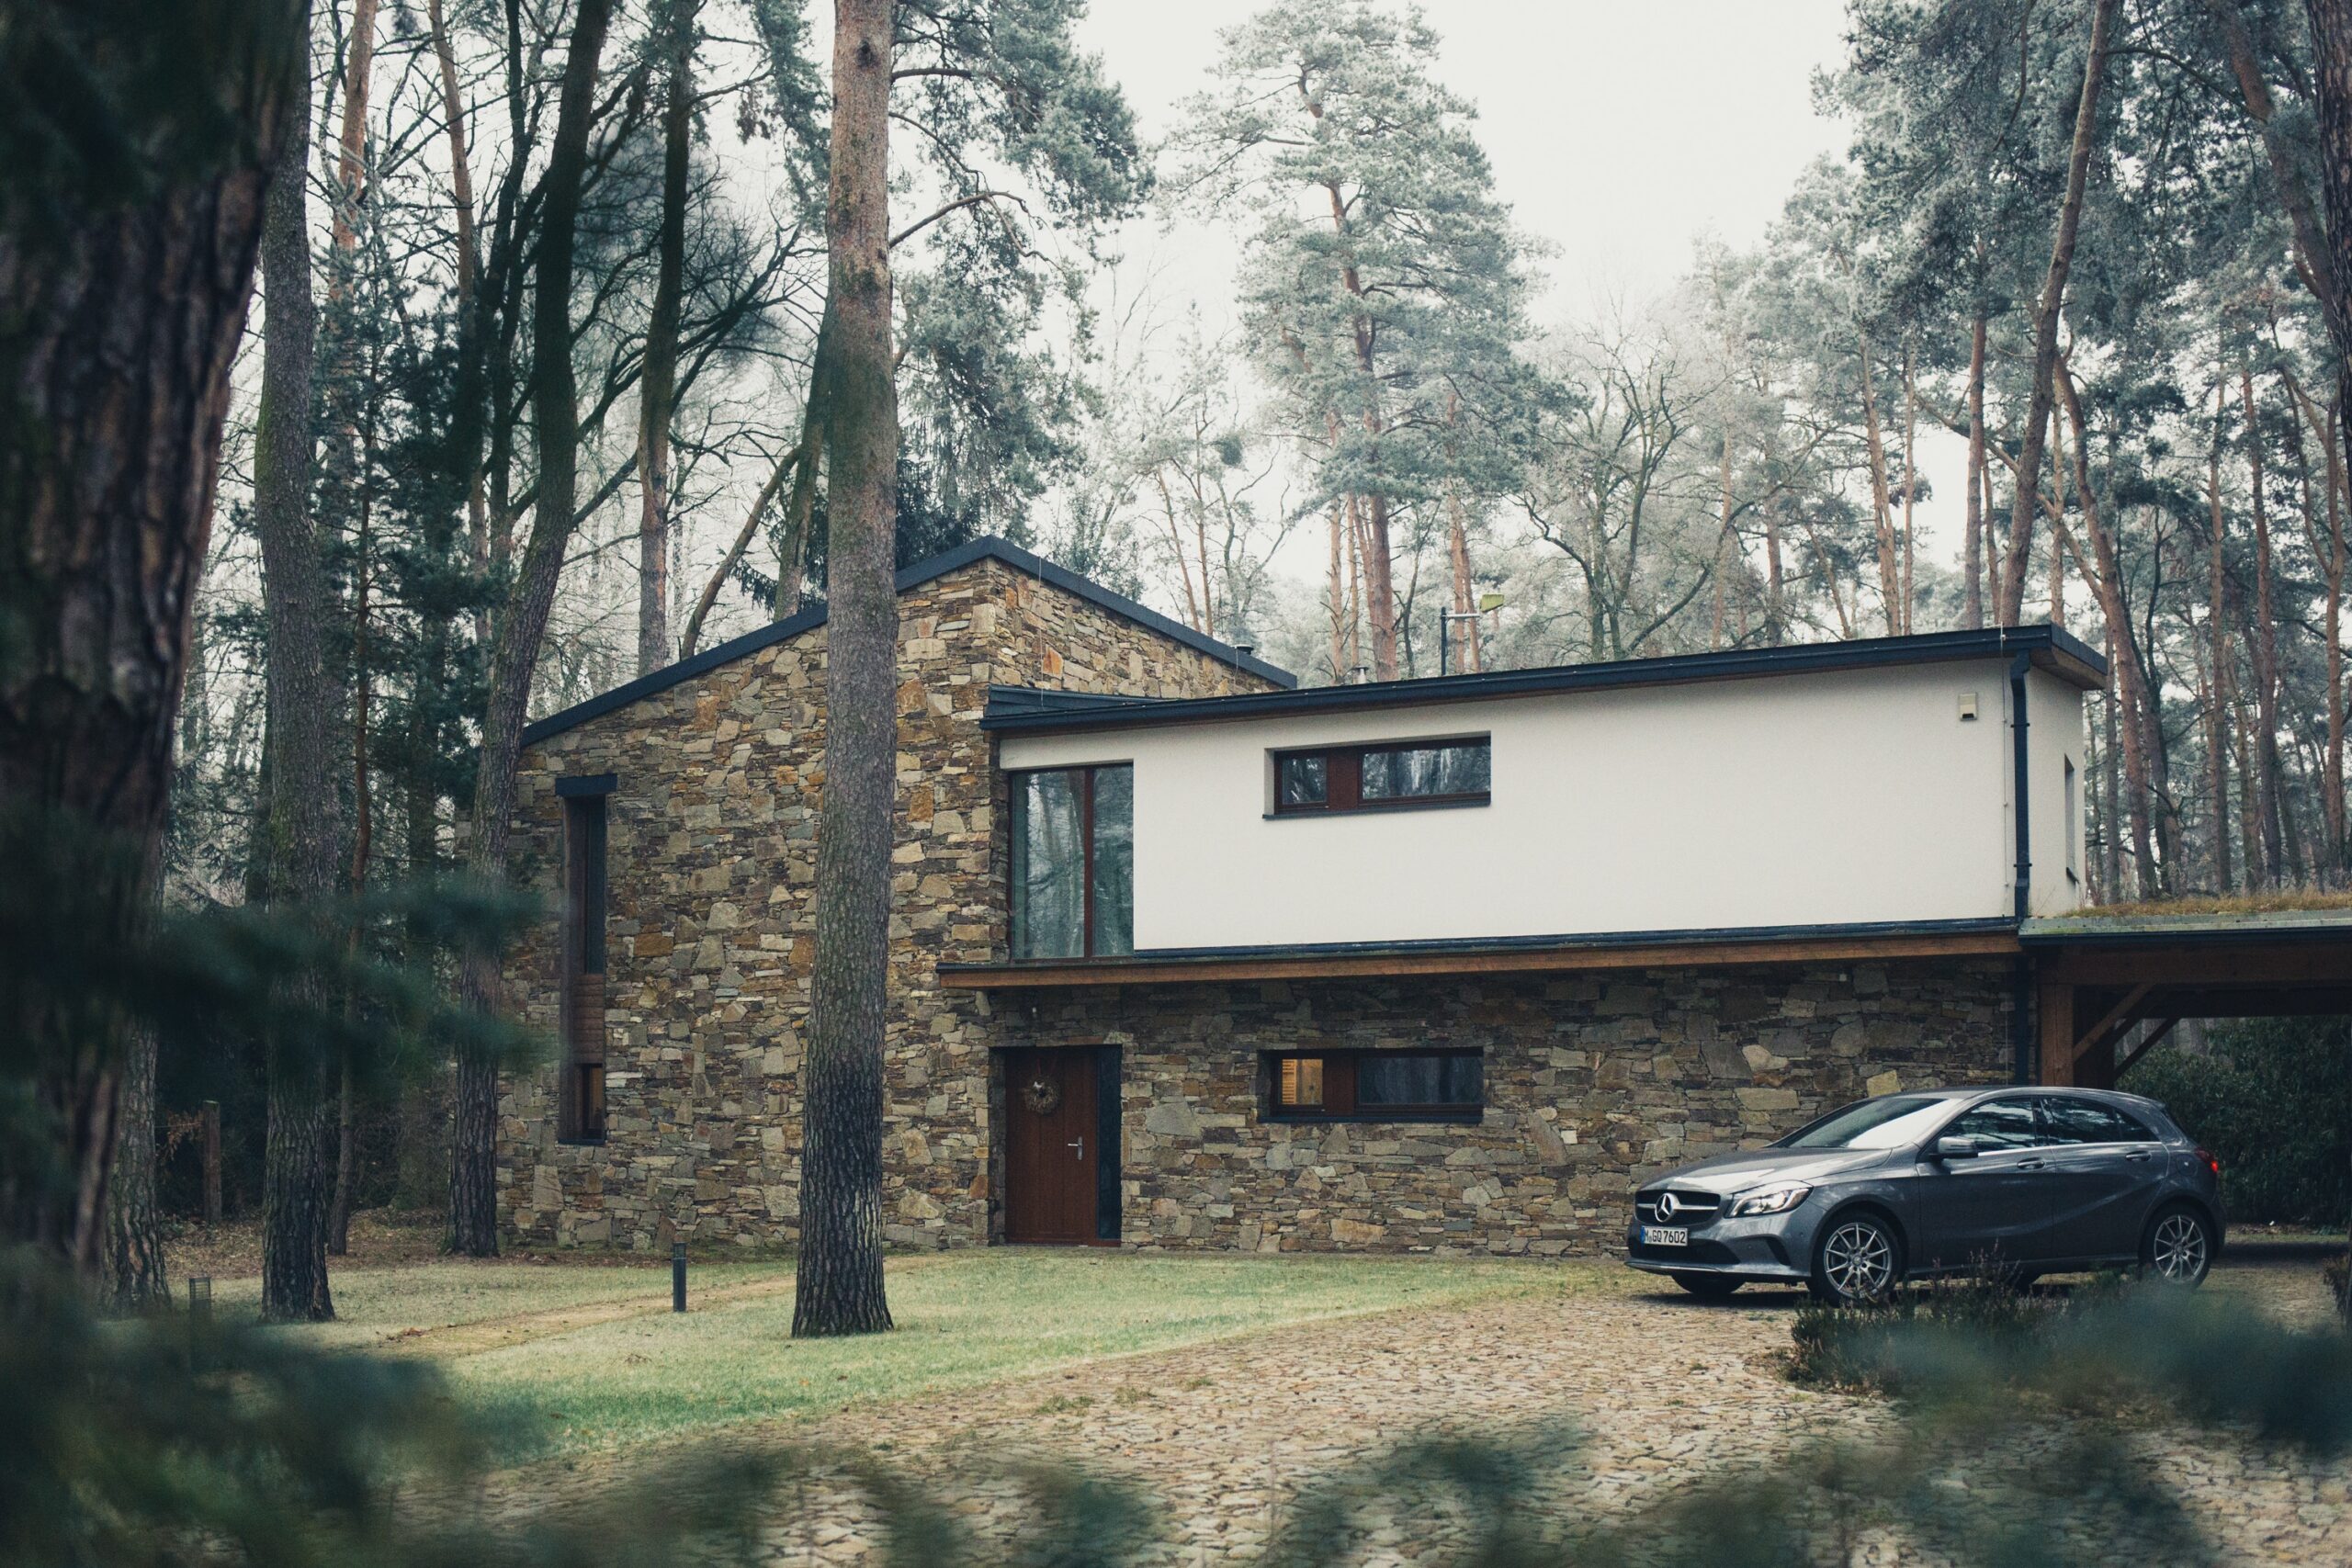 House surrounded by trees with a car